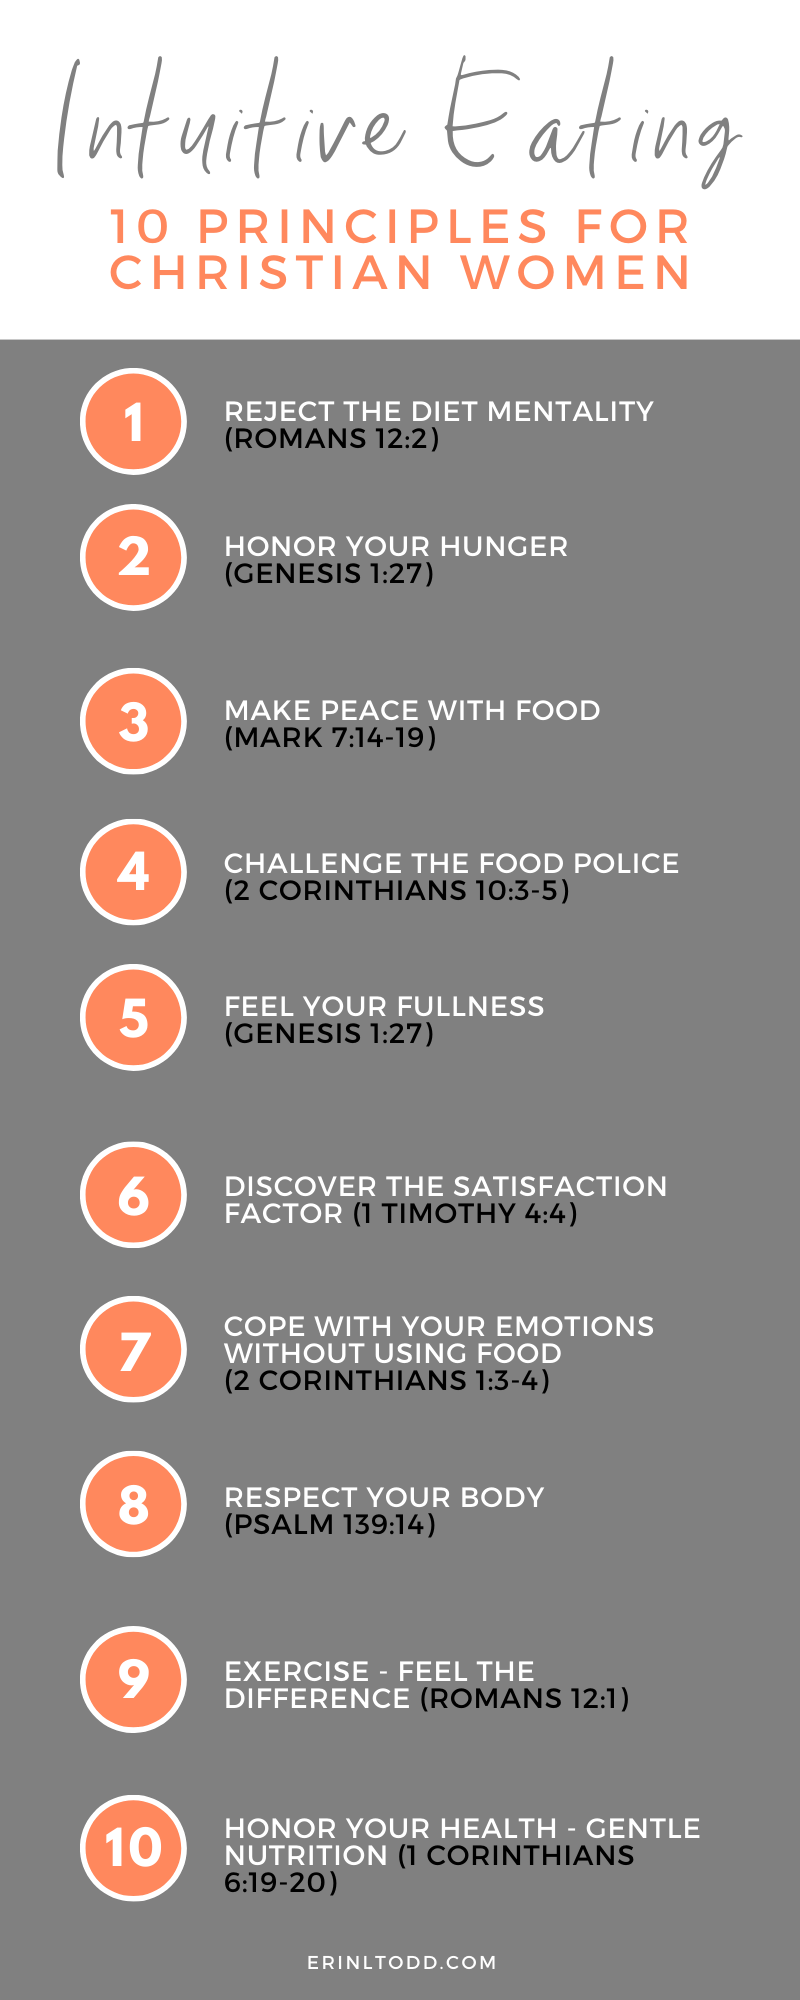 Intuitive Eating: 10 Principles for Christian Women